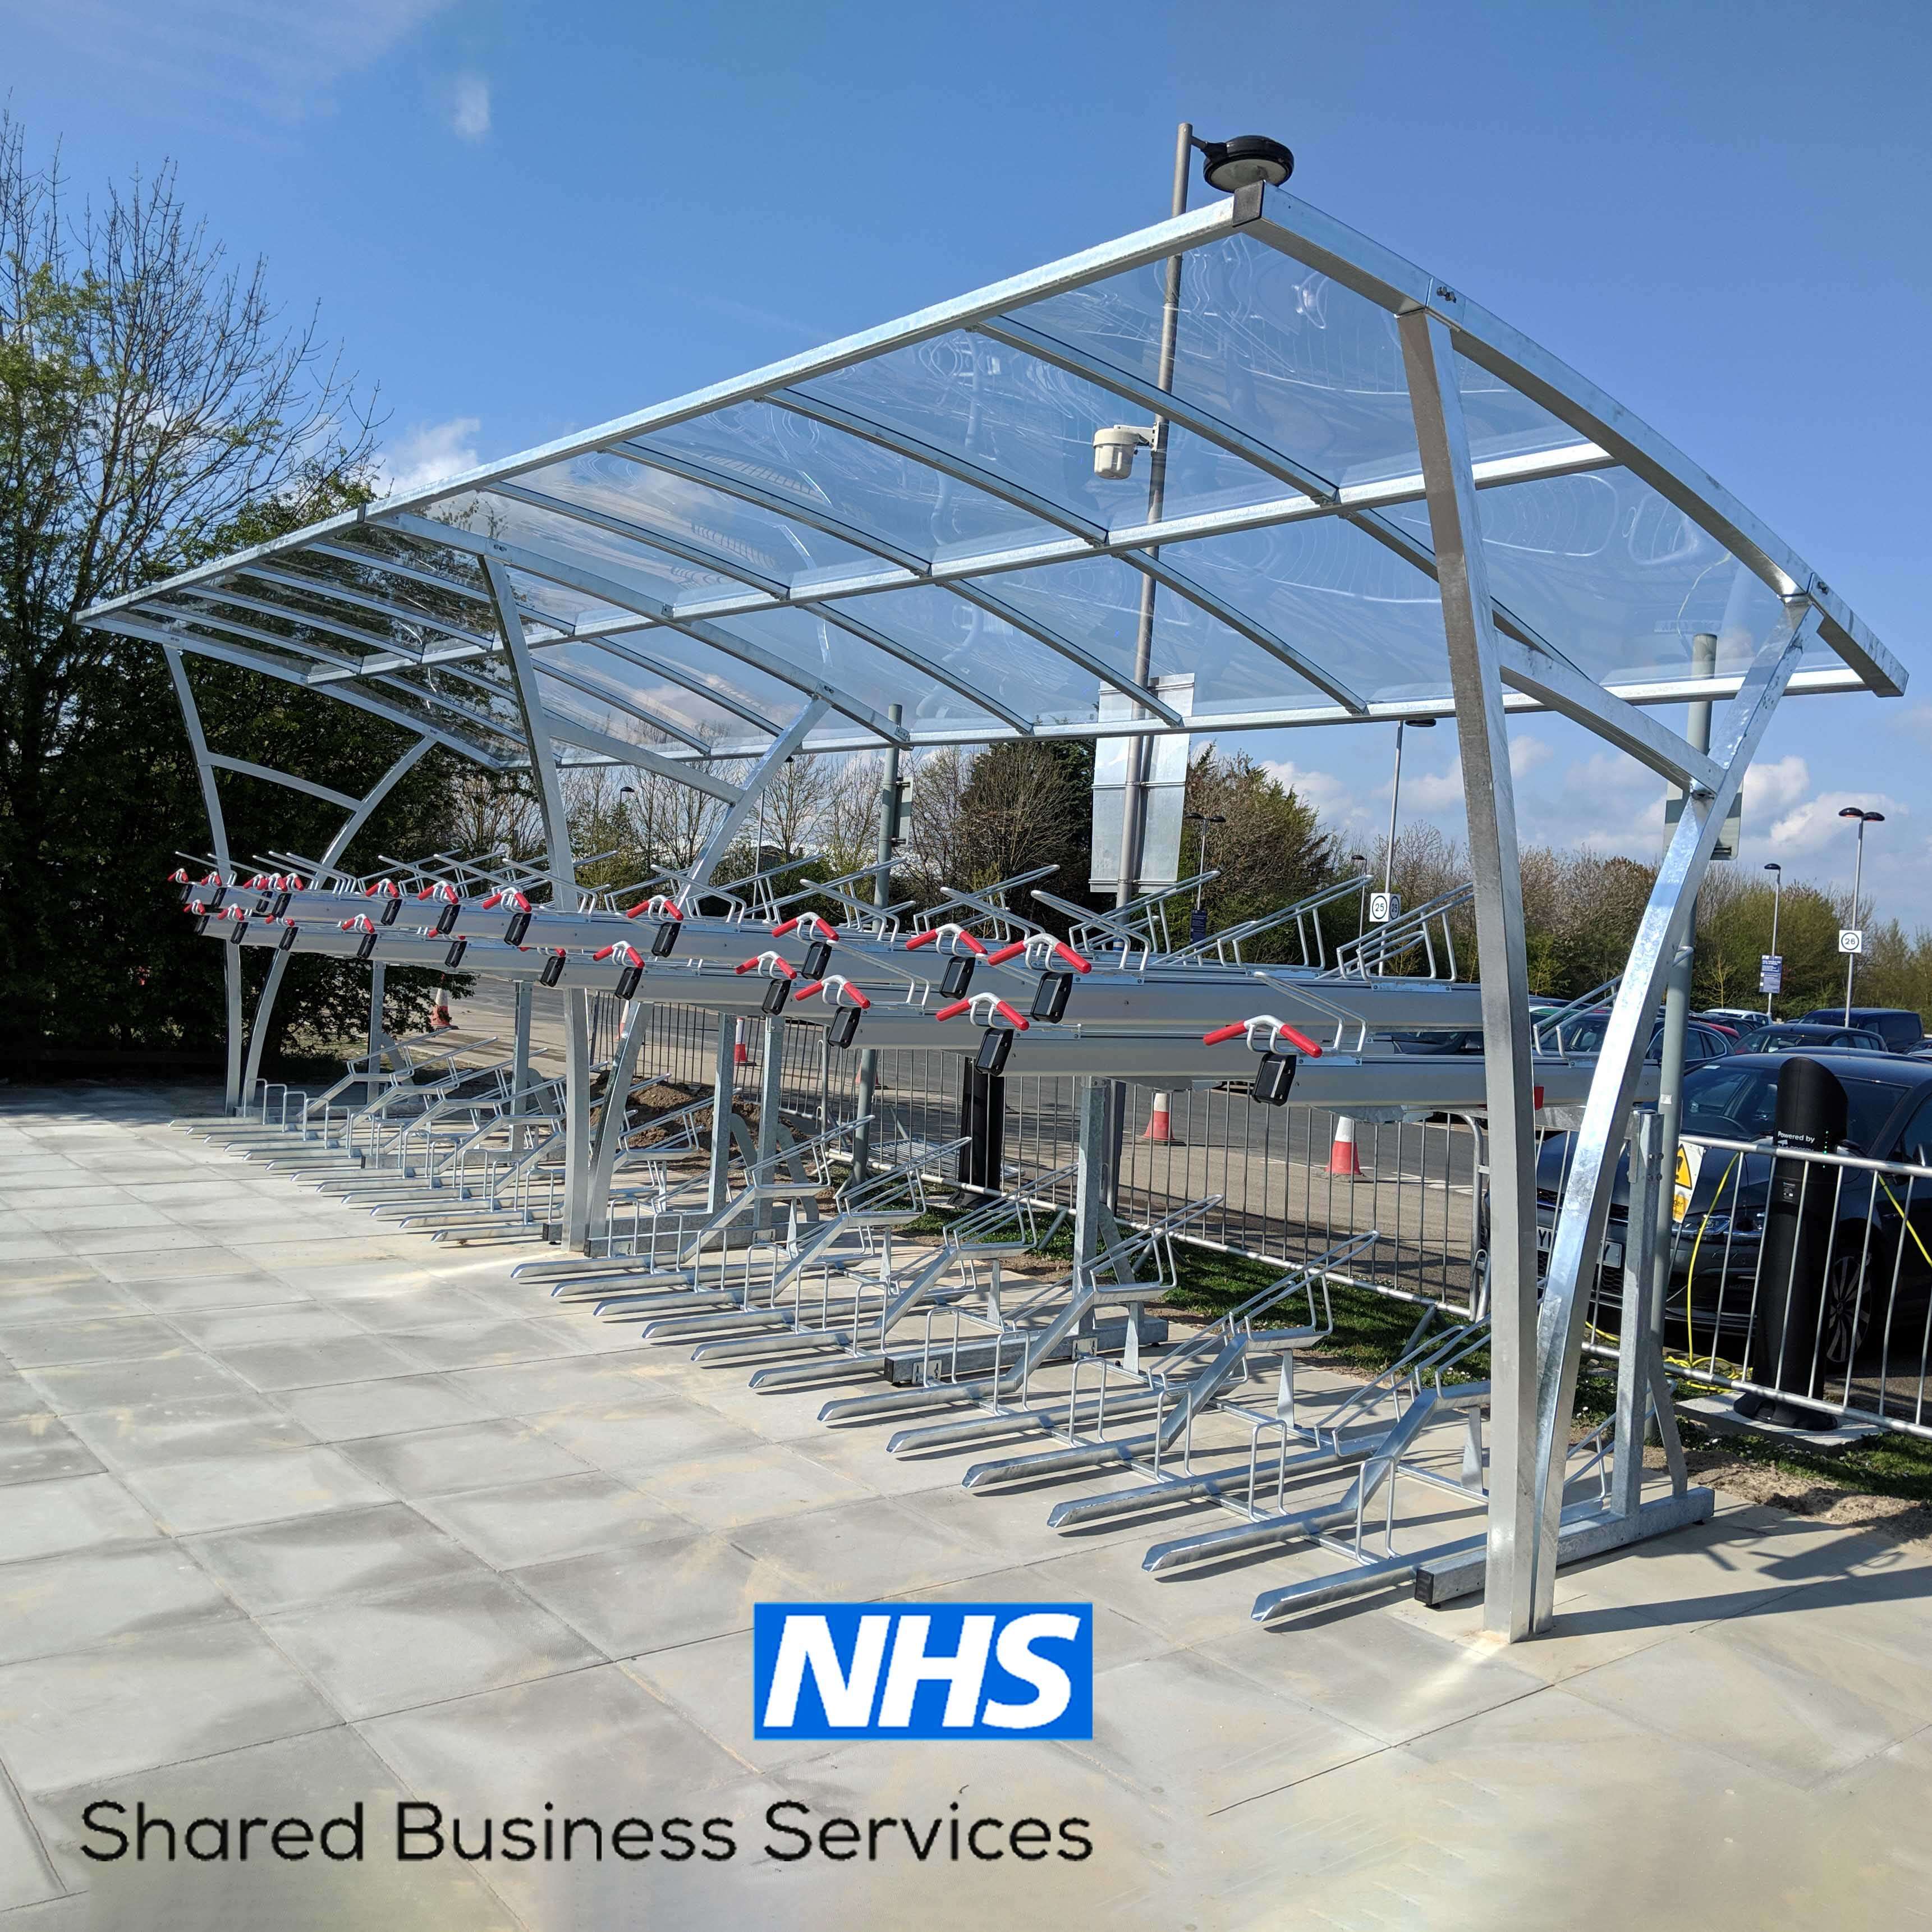 Cycle Parking NHS Shared Business Services